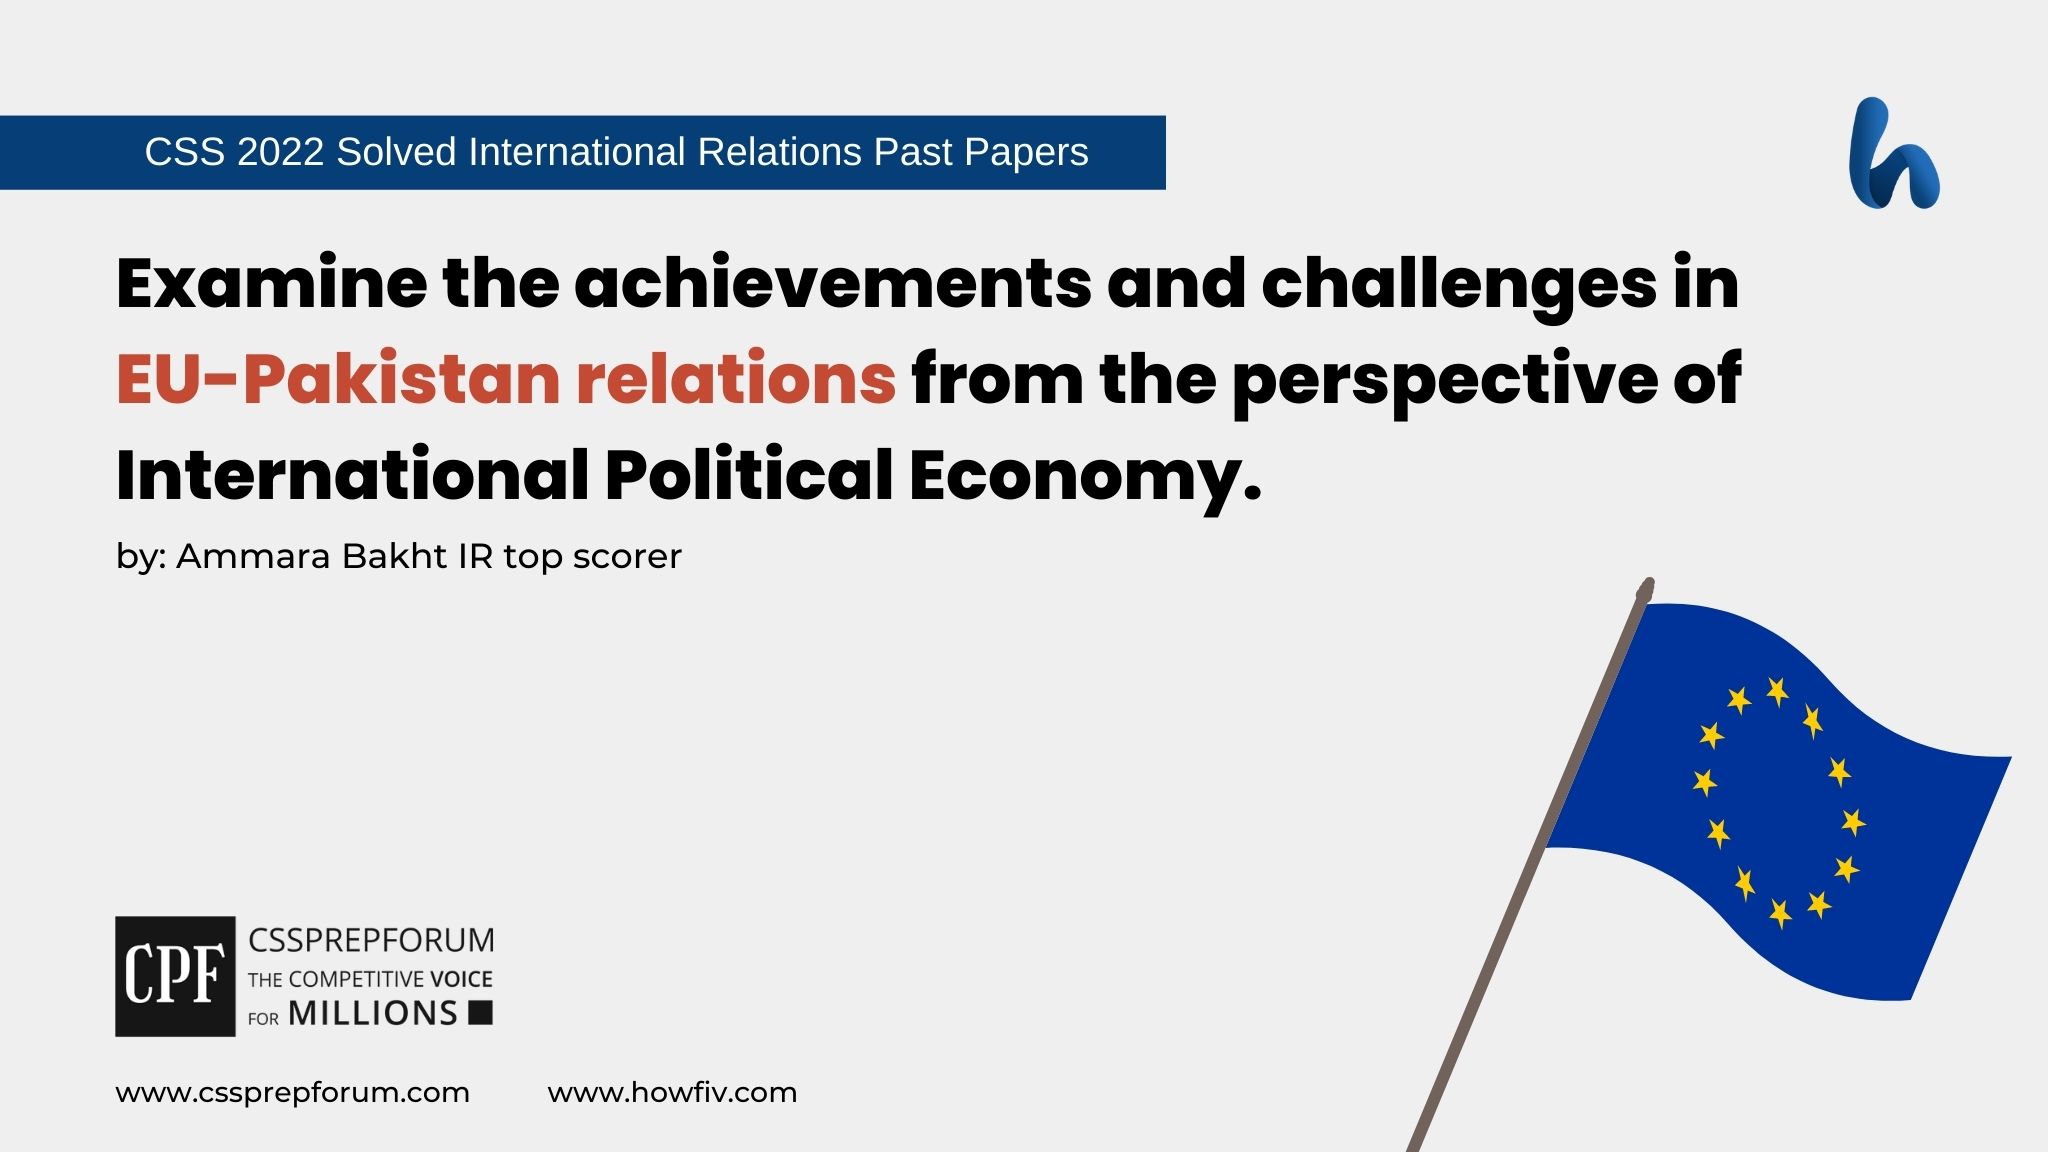 Q7. examine the achievements and challenges in eu-pakistan relations from the perspective of international political economy.